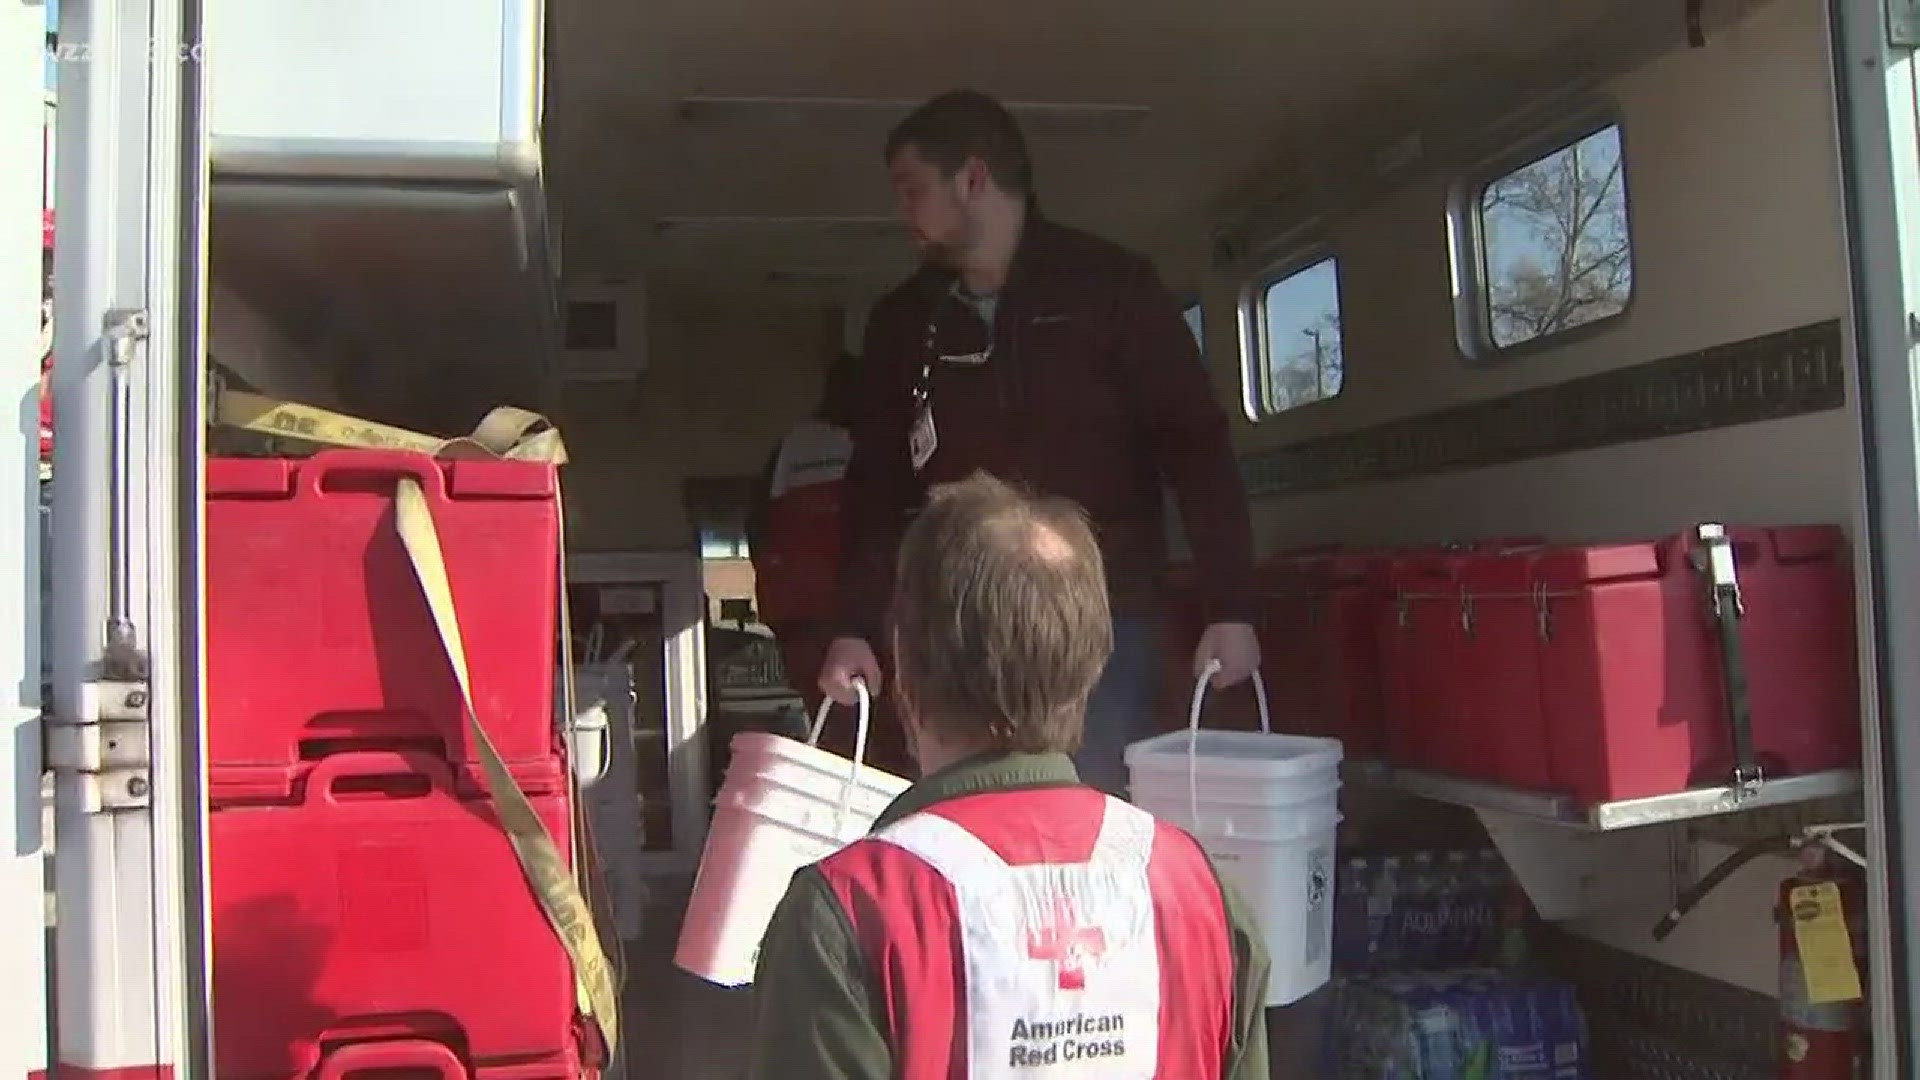 Red Cross, Salvation Army helping those impacted by flooding